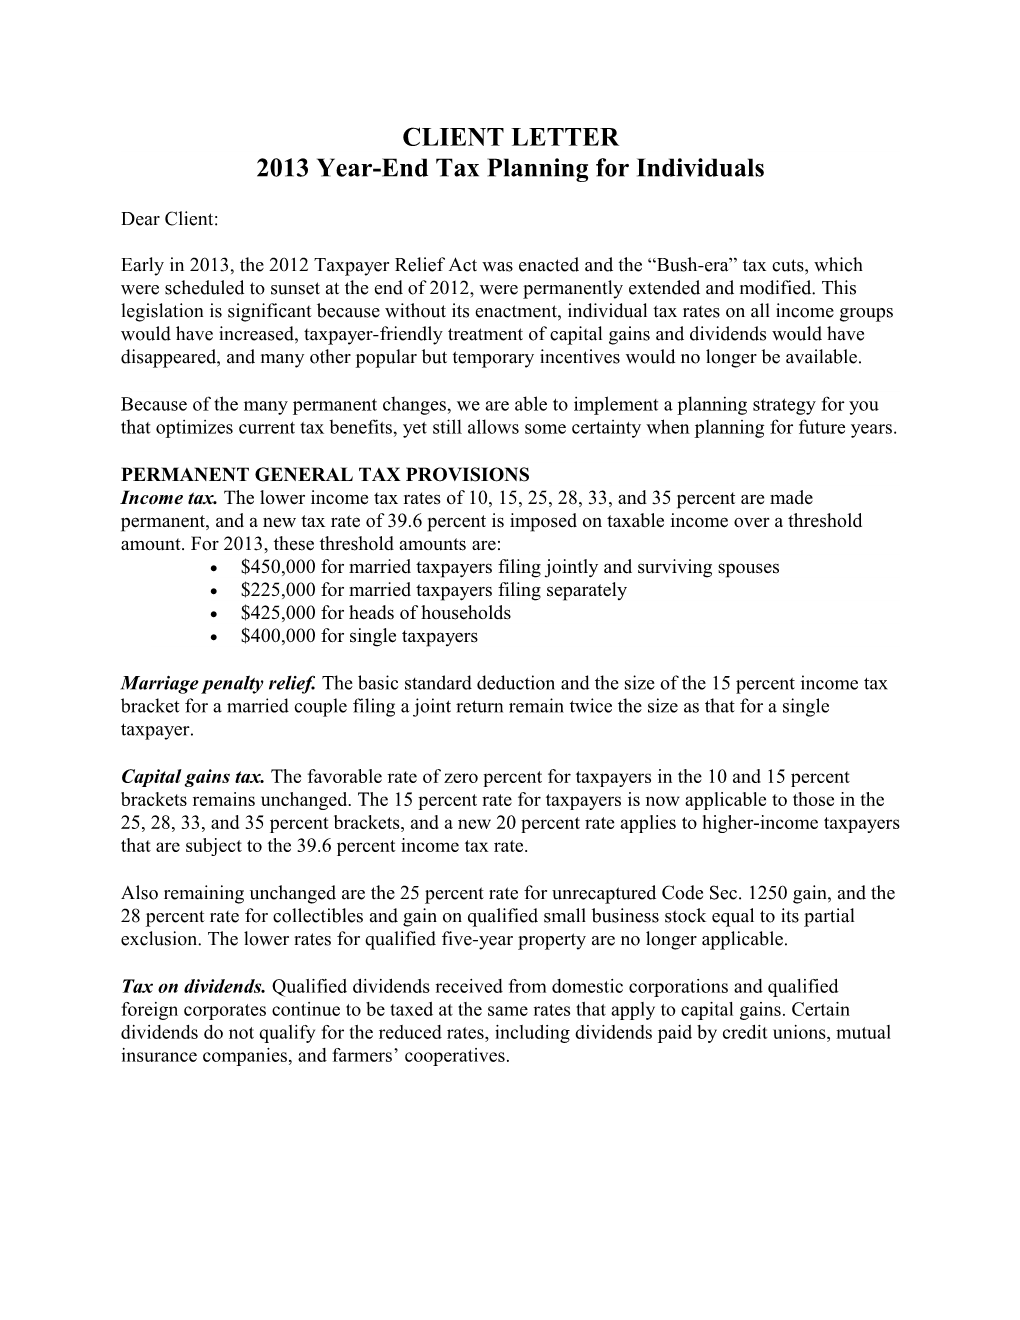 2013 Year-End Tax Planning for Individuals